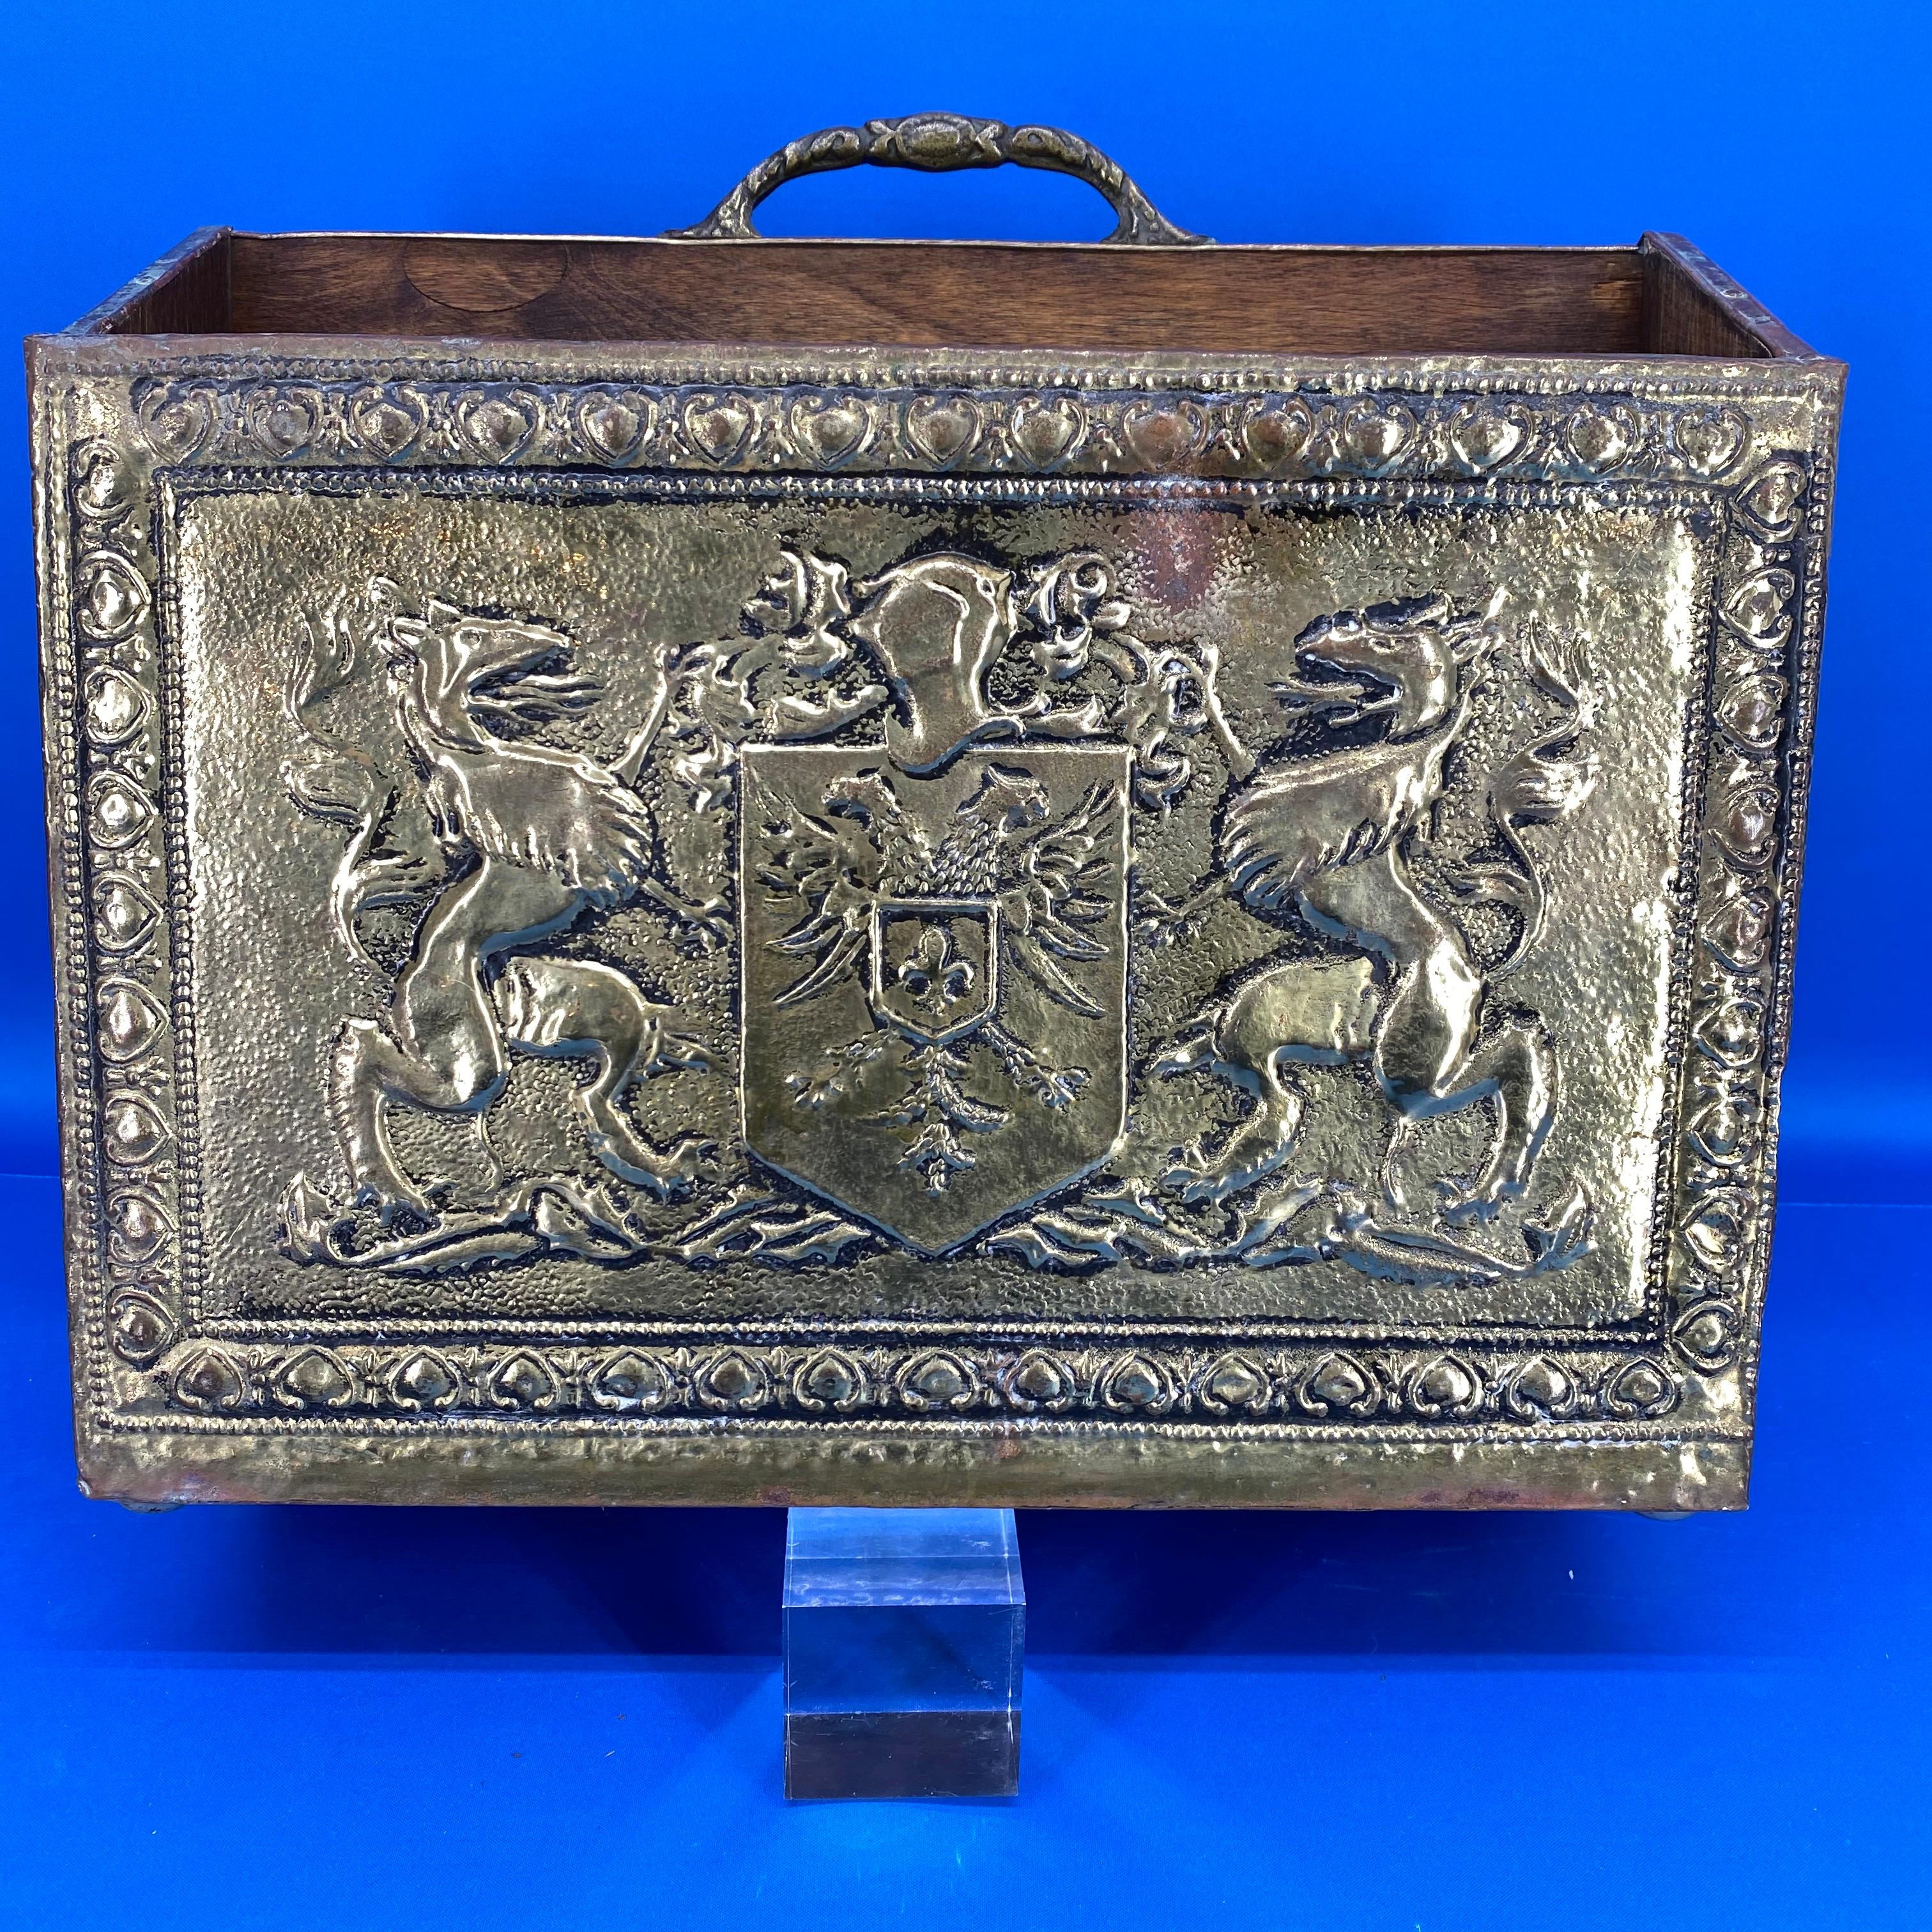 Late Victorian Early Victorian Style Brass Magazine Rack With Code Of Arms, Griffins And Eagles